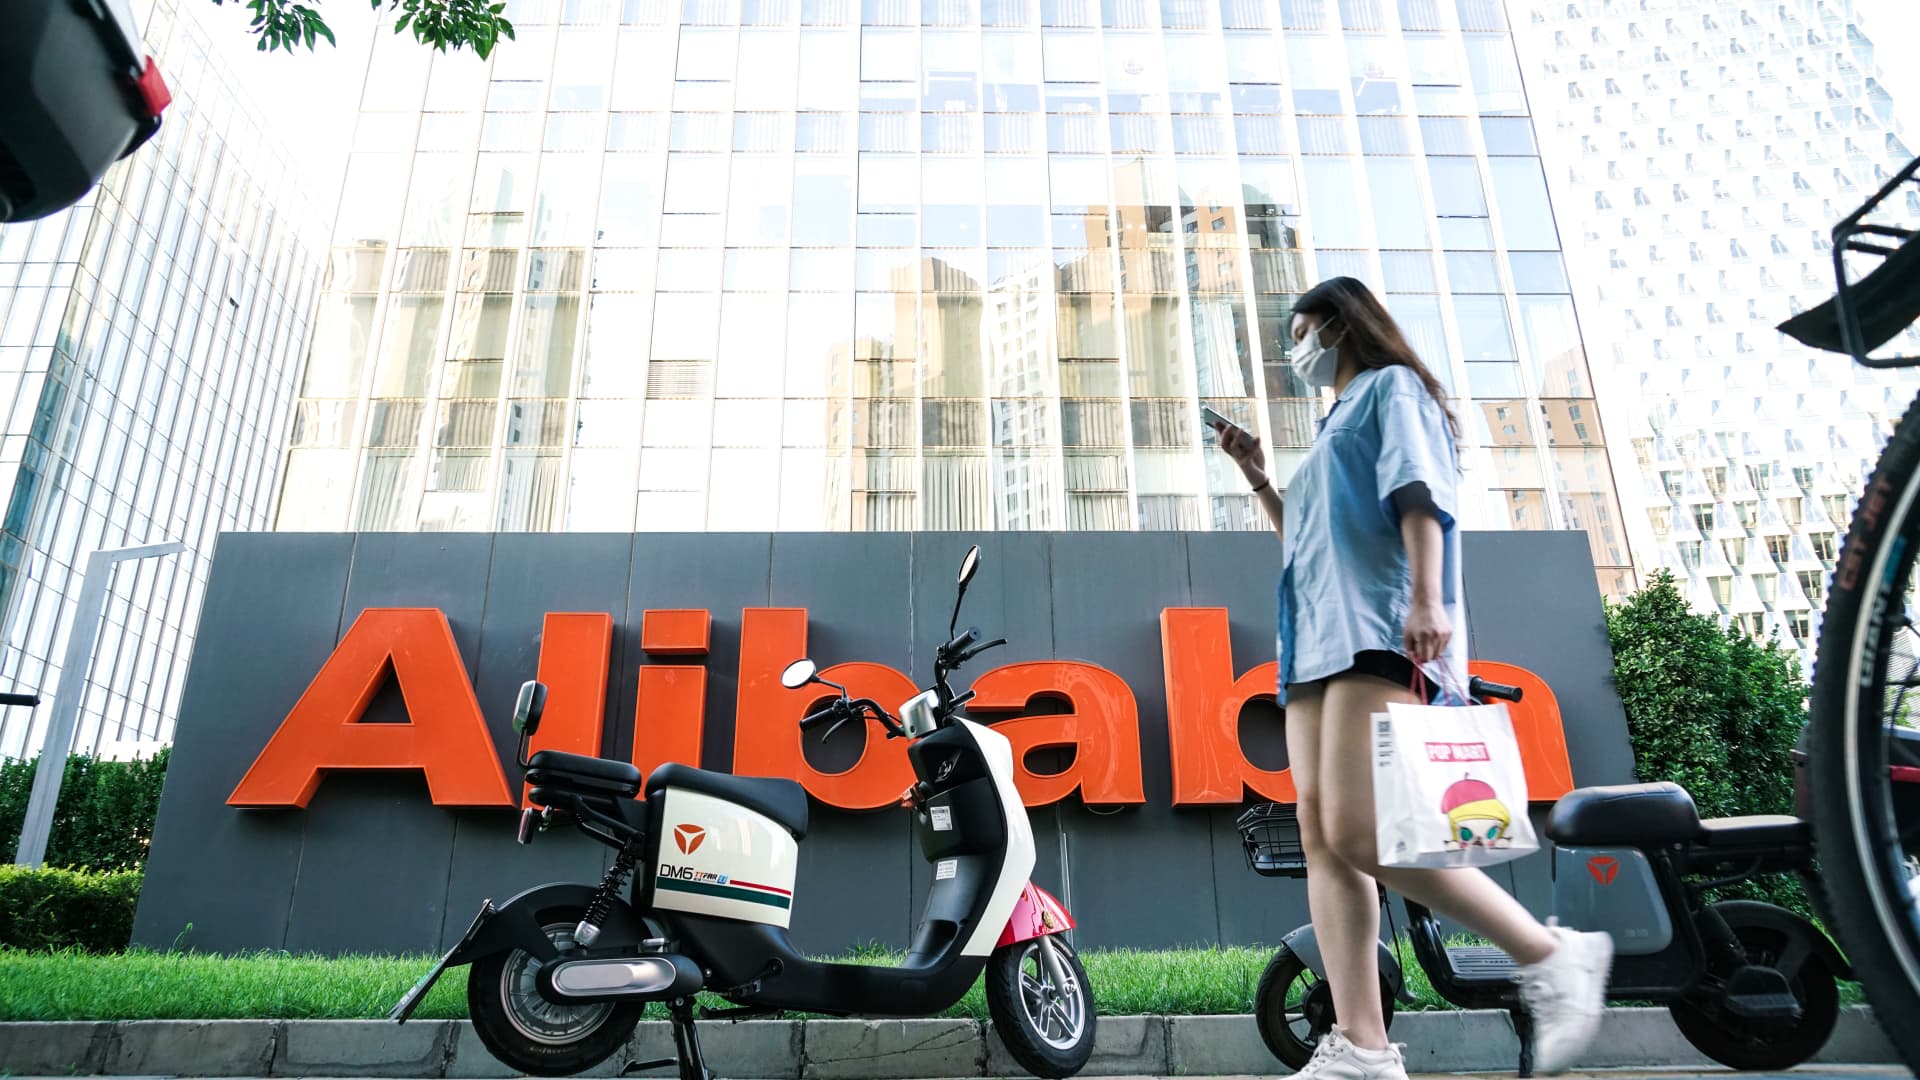 Alibaba shares jump 7% after quarterly earnings beat expectations